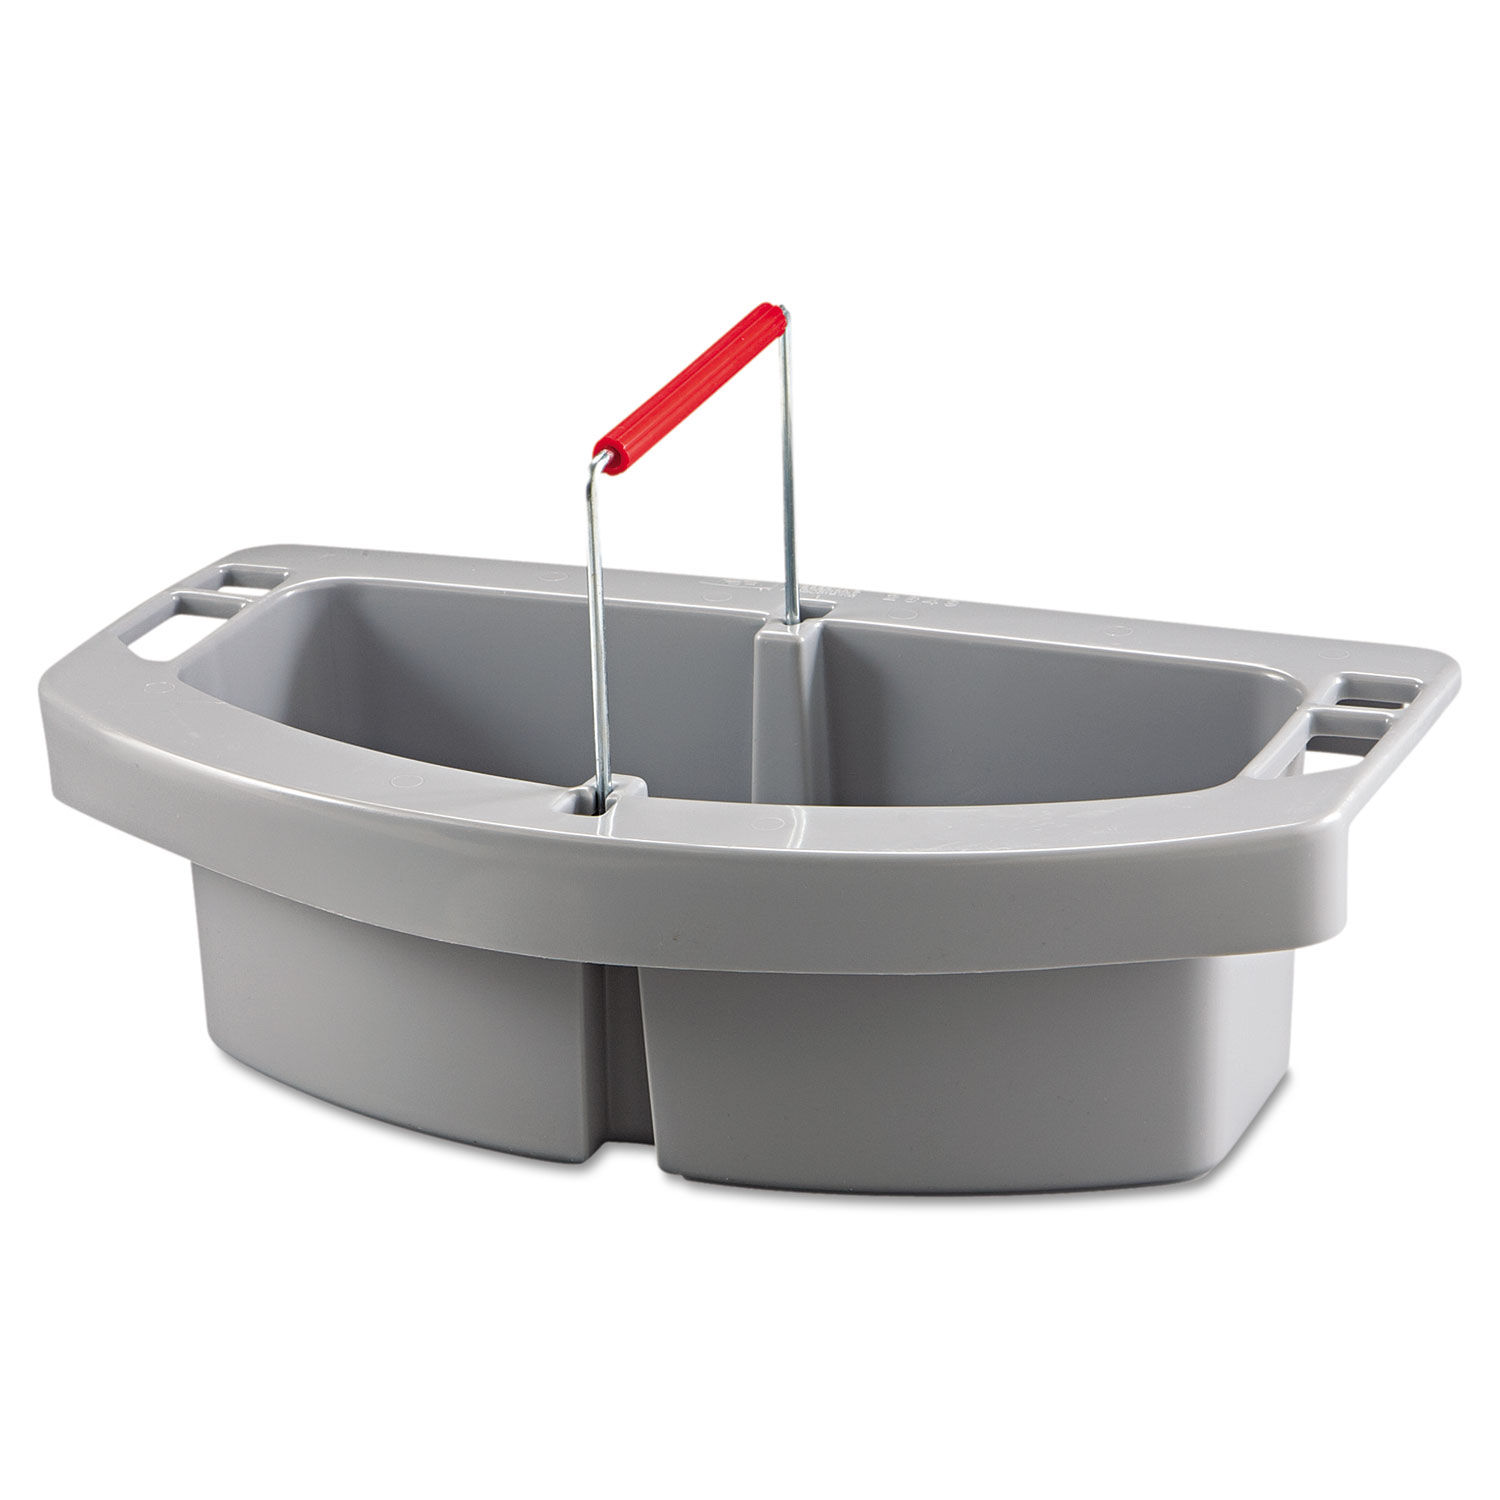 Maid Caddy Two Compartments, 16 x 9 x 5, Gray